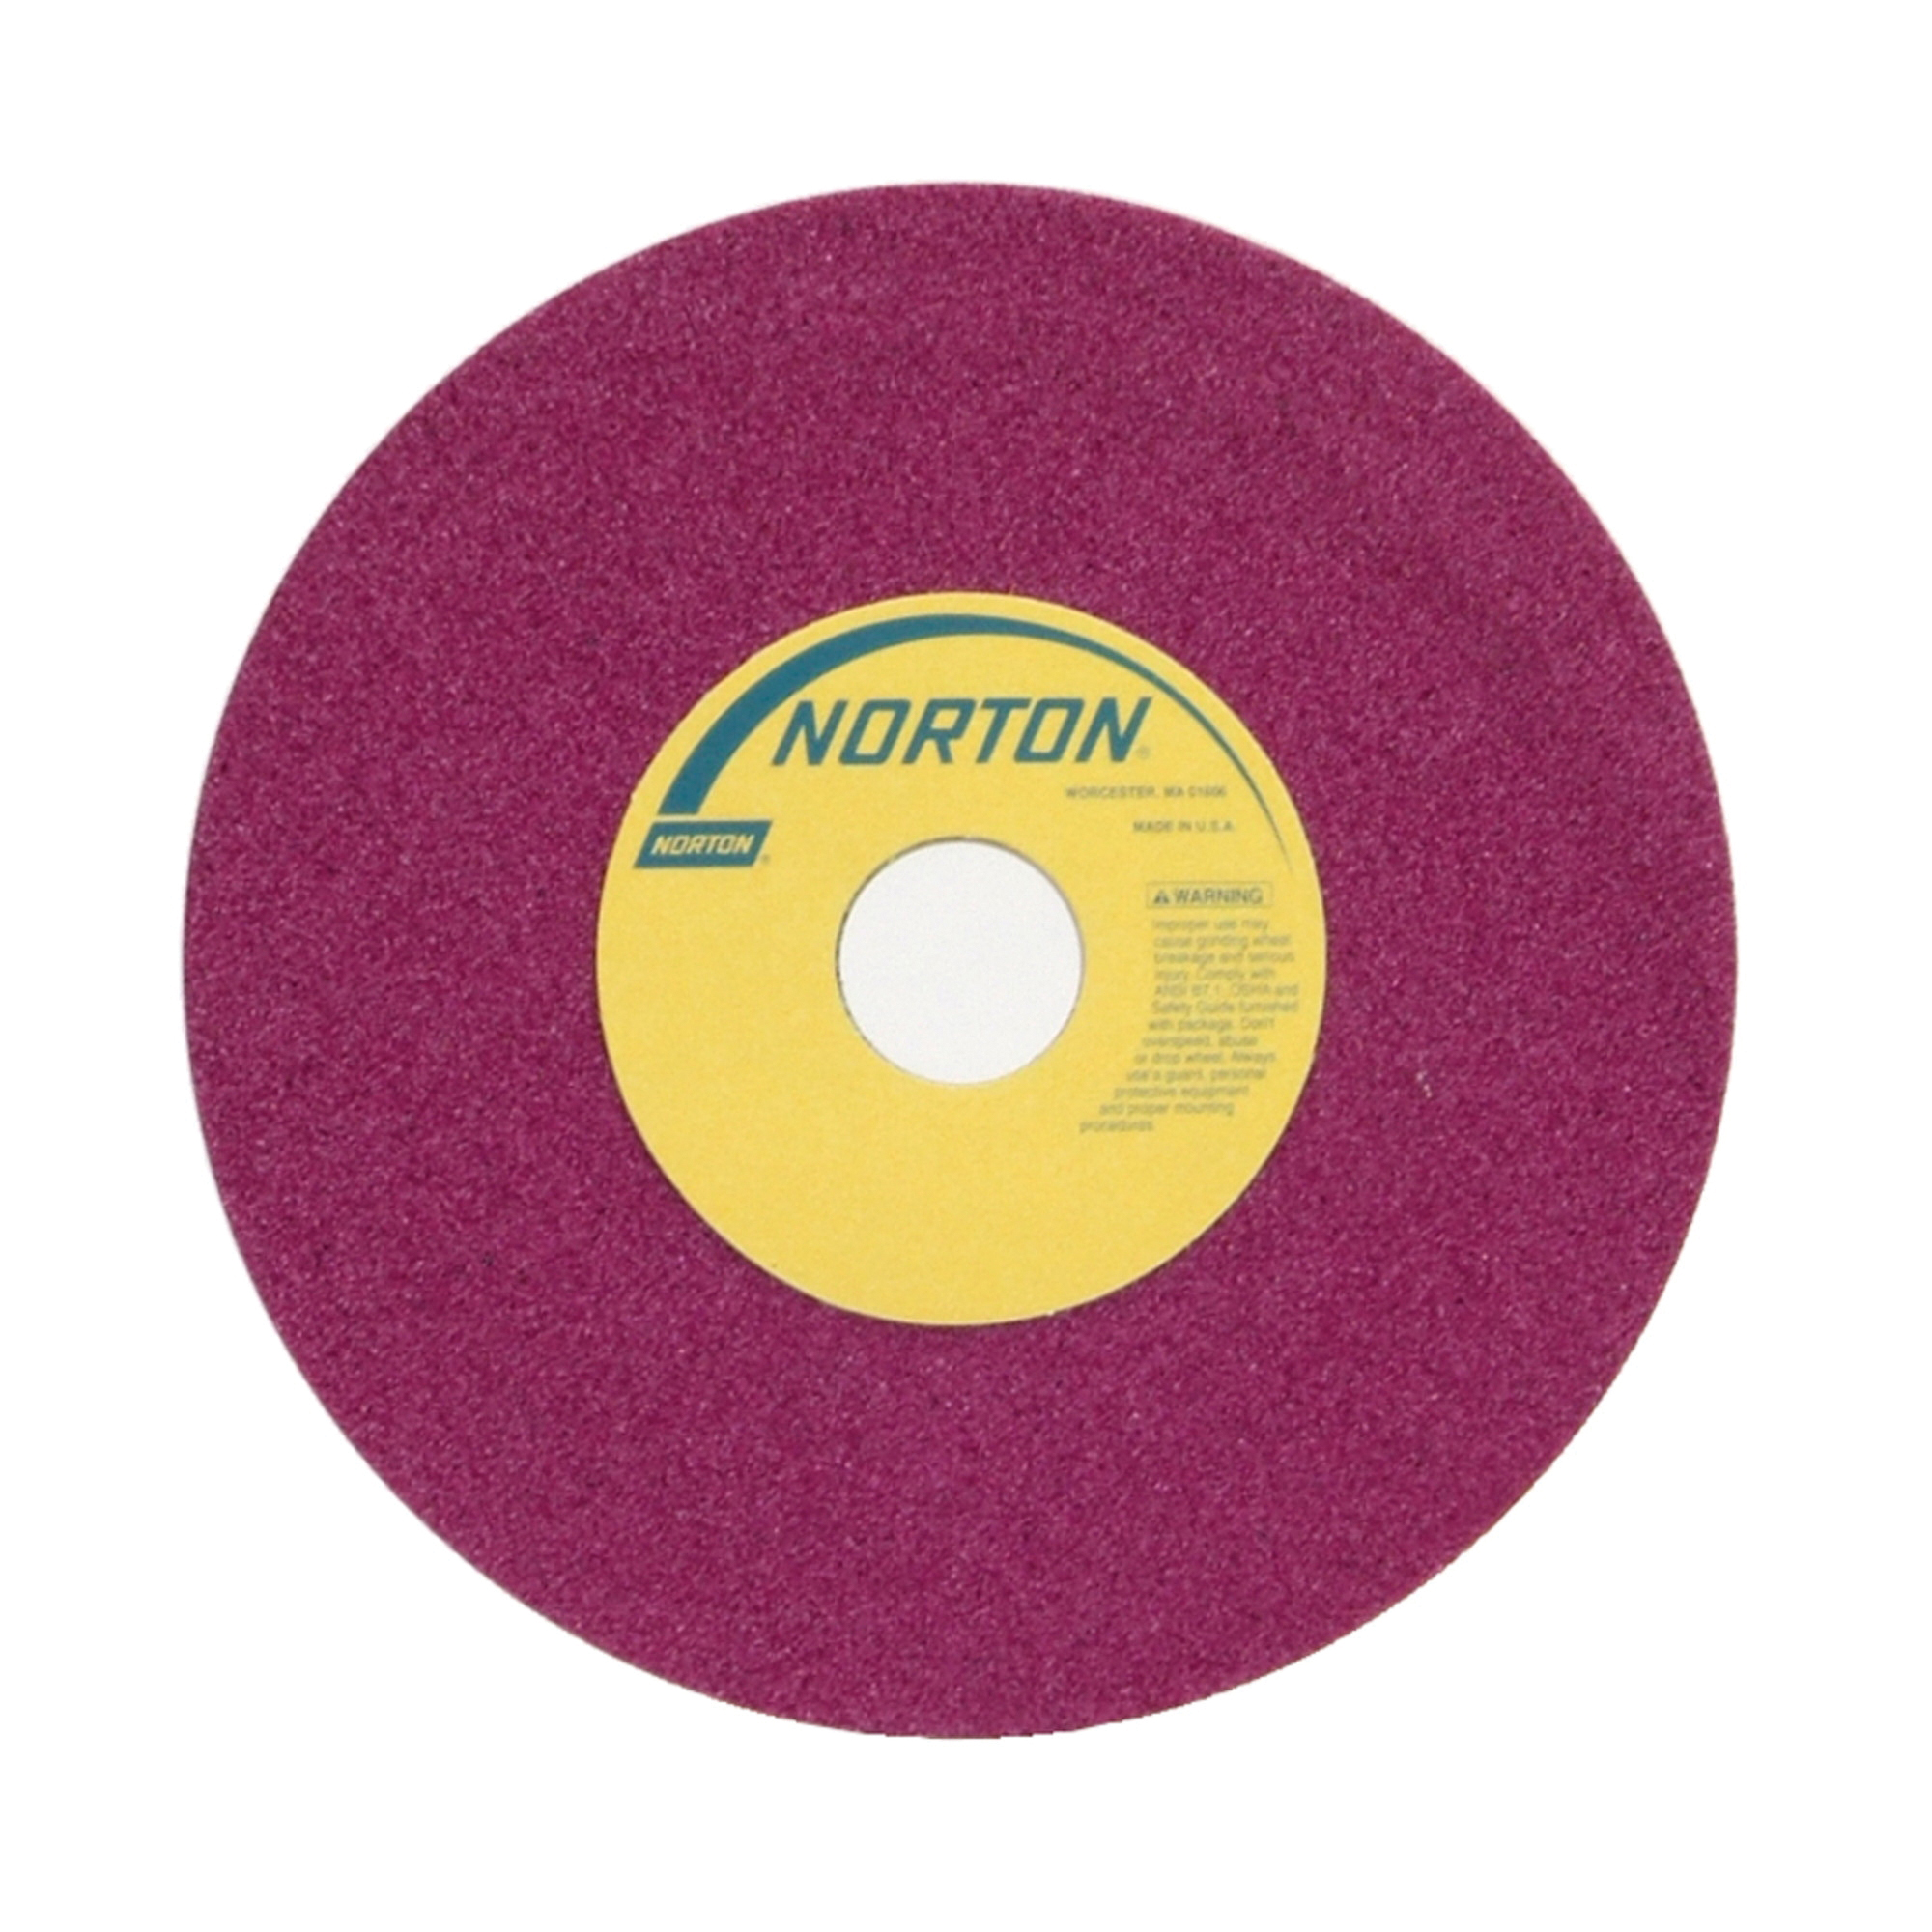 Norton® 69936662101 48A Straight Toolroom Wheel, 8 in Dia x 1/2 in THK, 1-1/4 in Center Hole, 46 Grit, Aluminum Oxide Abrasive